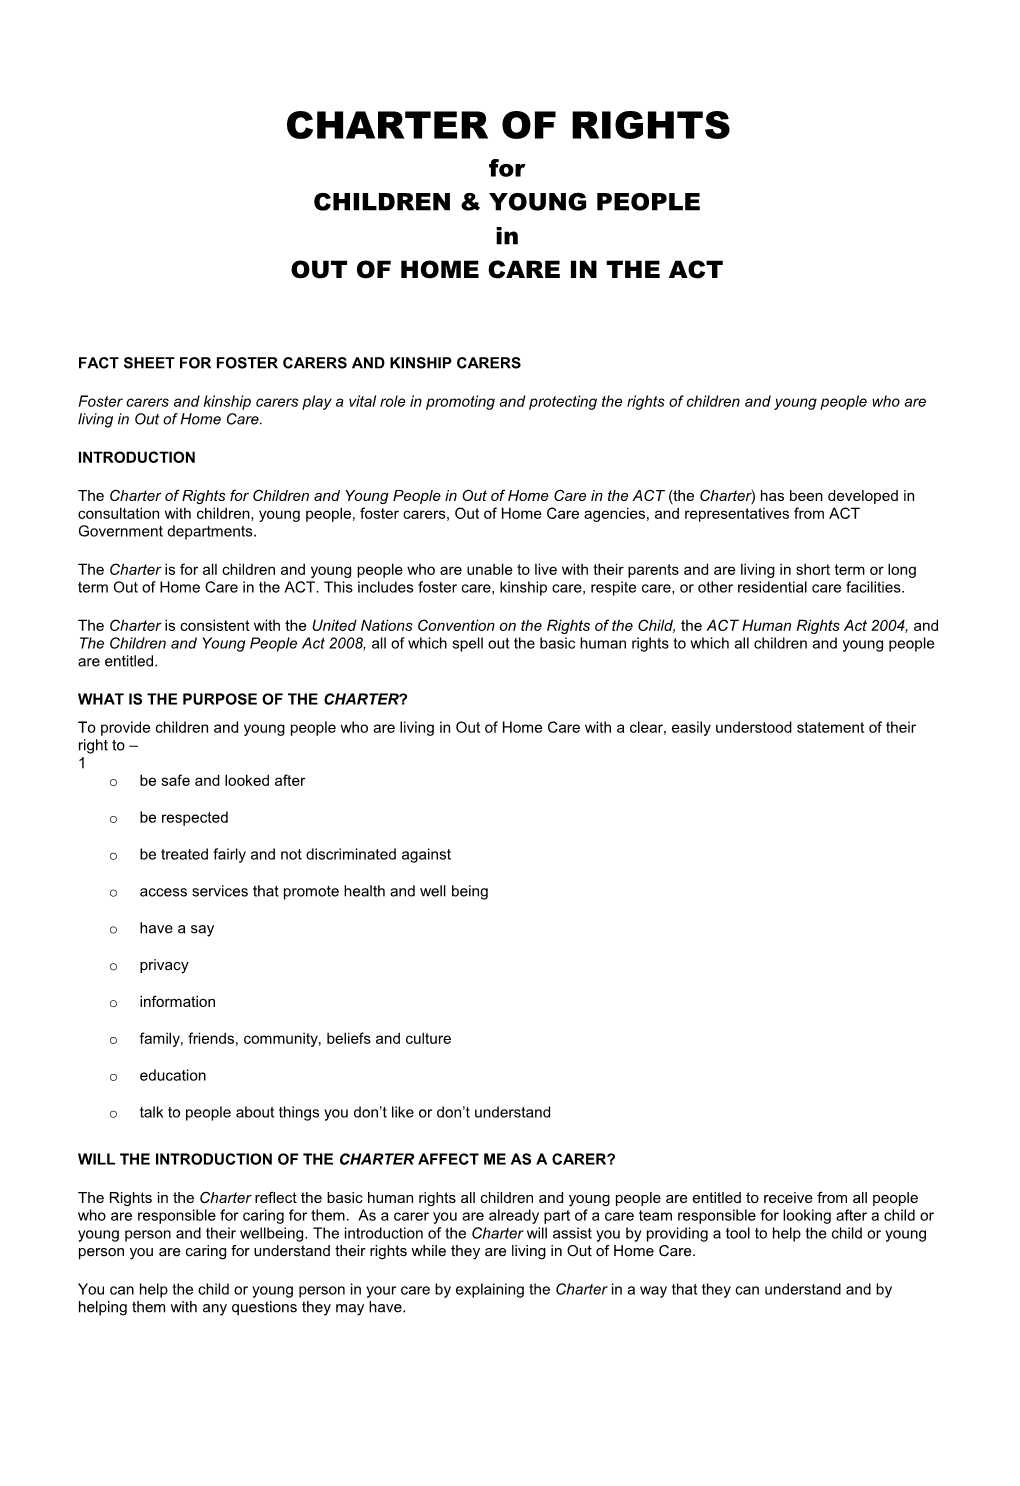 Charter of Rights for Children and Young People in out of Home Care in the ACT - Carers